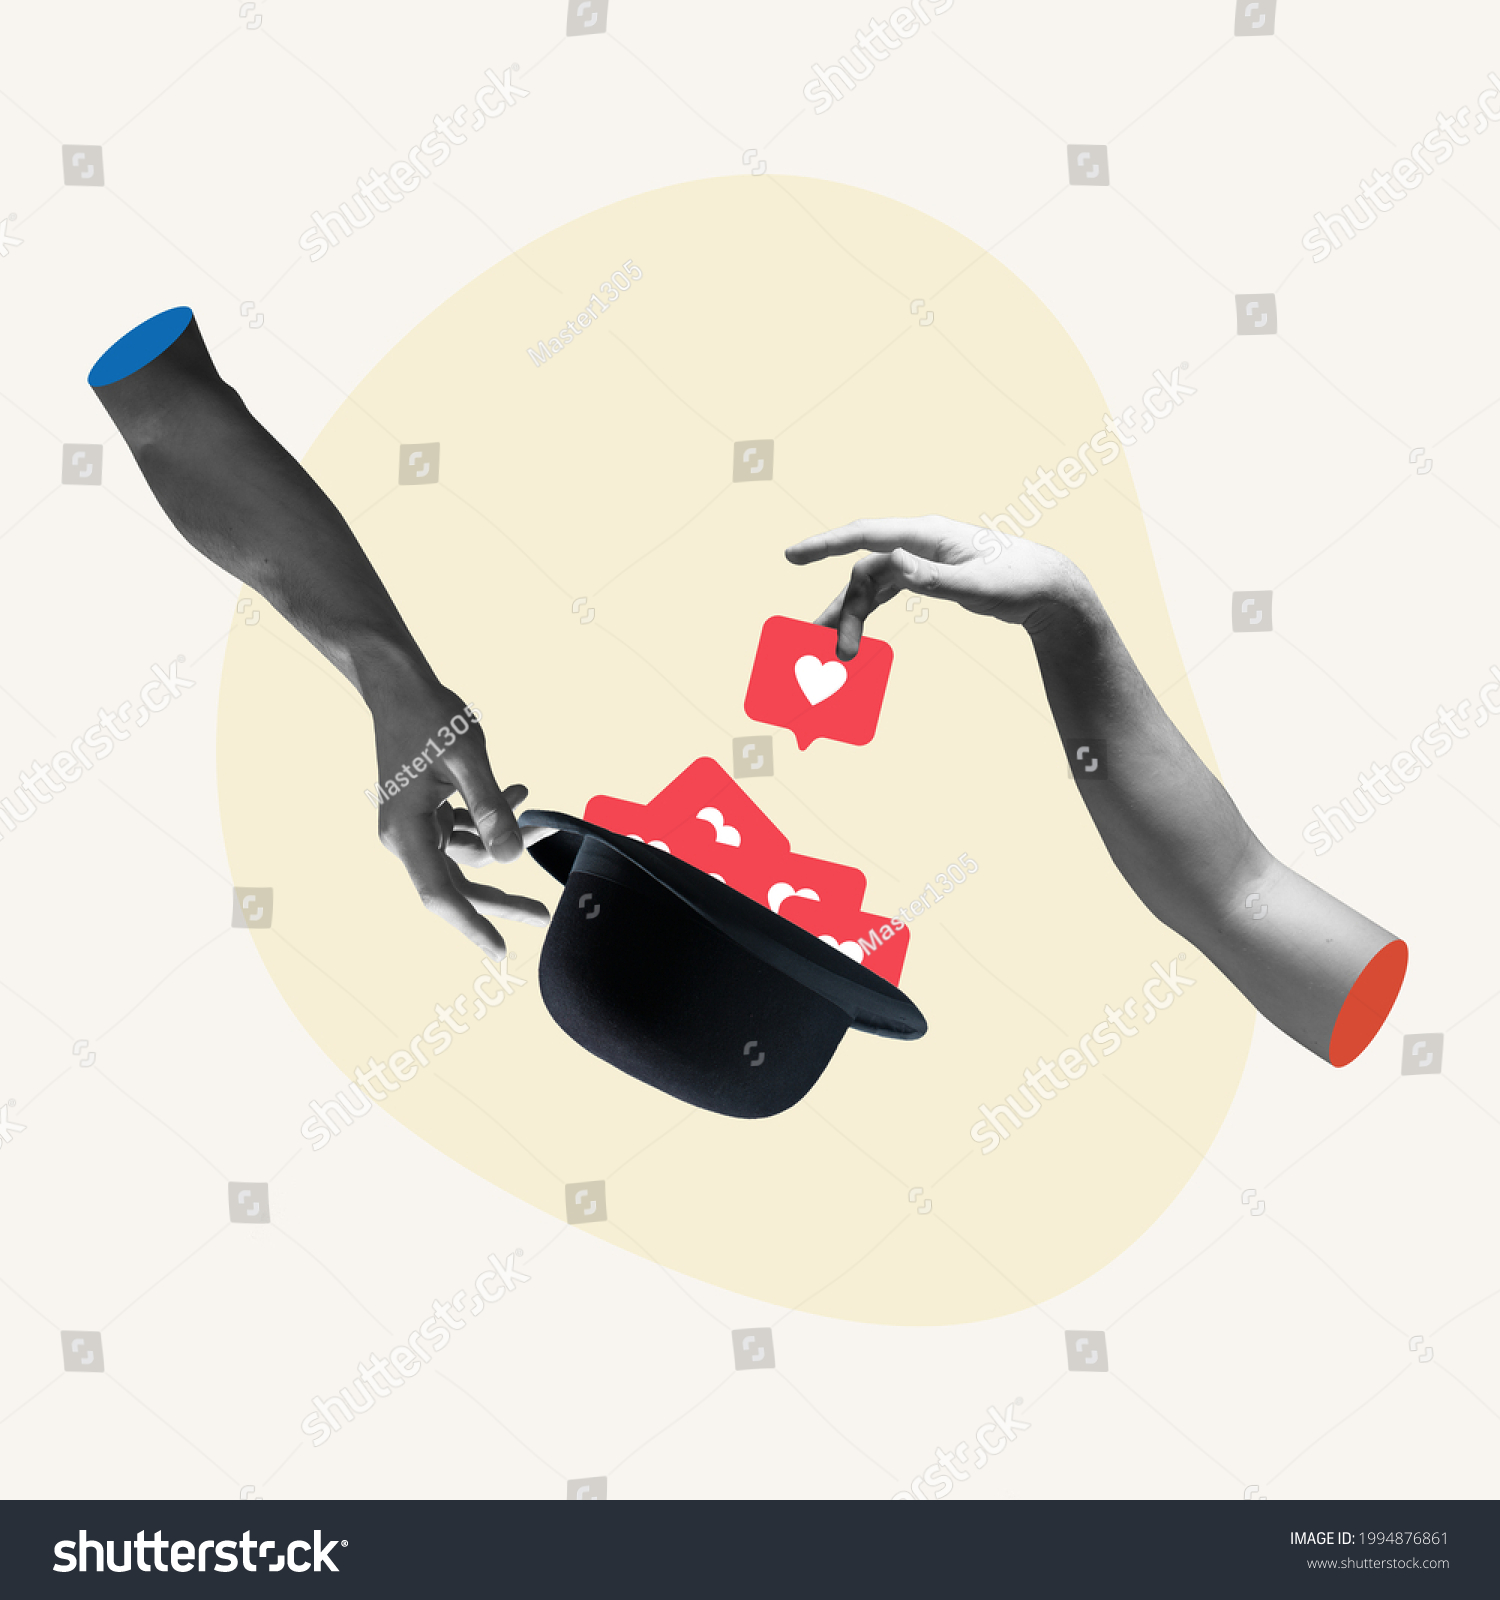 Modern gadget and classic hat. Hands aesthetic on bright background, artwork. Concept of human relation, community, togetherness, symbolism, surrealism. Likes in phone as approval symbol #1994876861